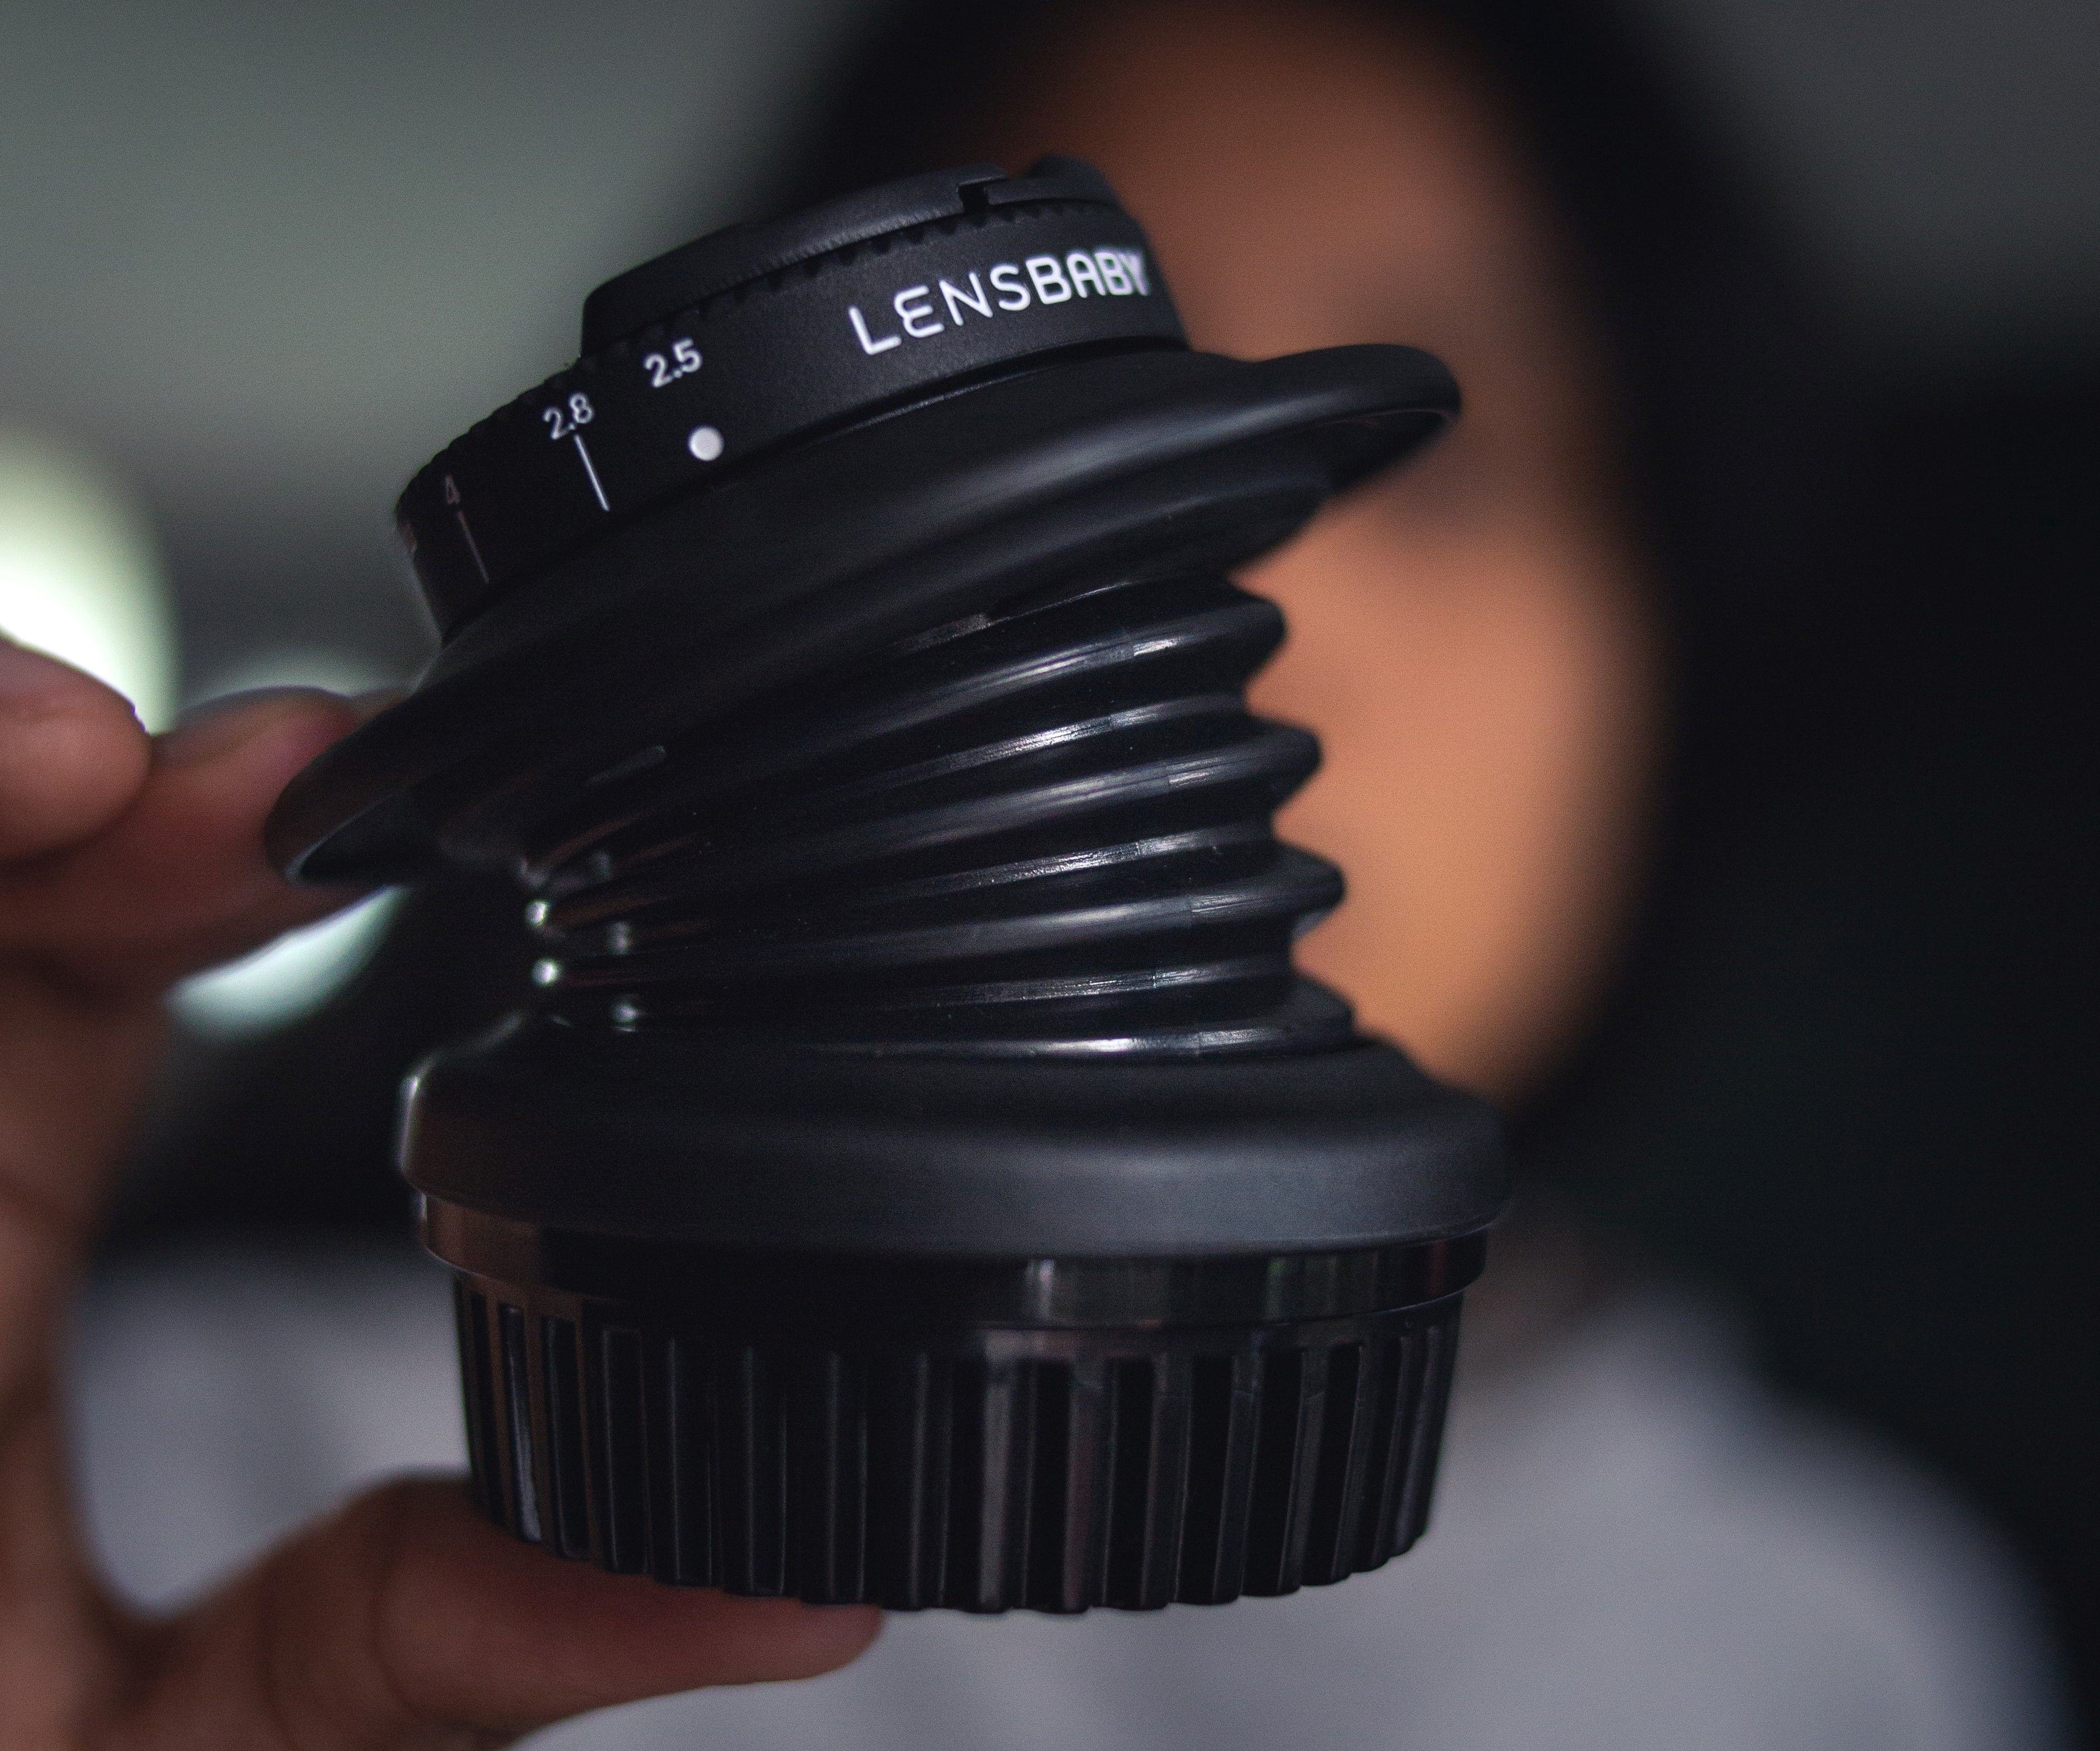 One of Lensbaby's many freelensing accessories